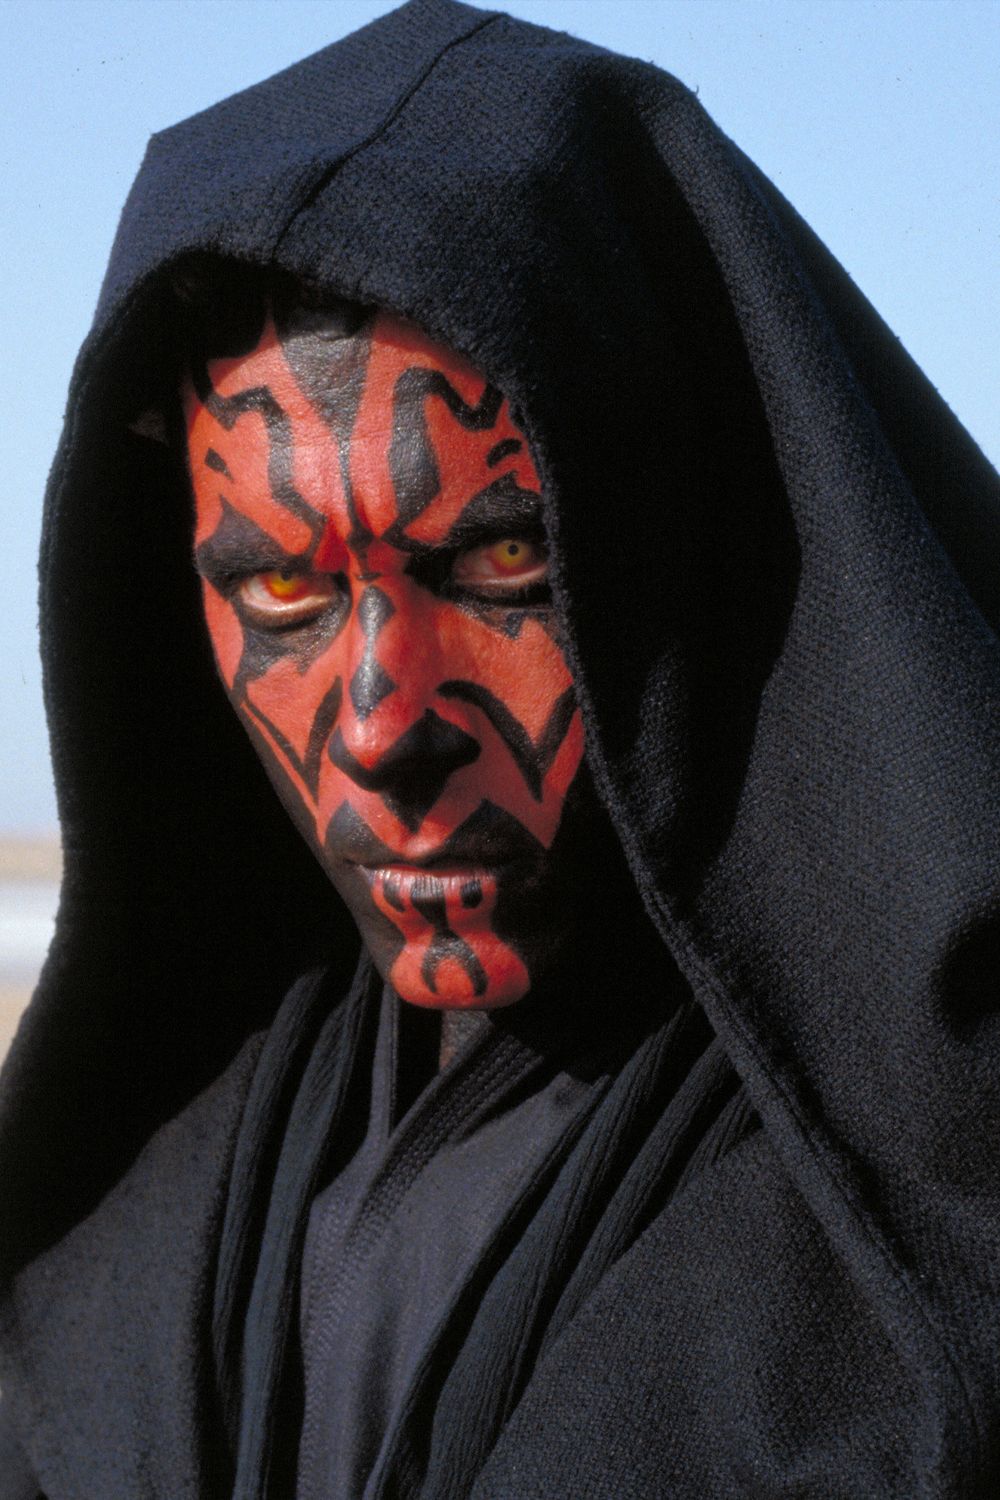 Ray Park as Darth Maul in Star Wars Episode I The Phantom Menace